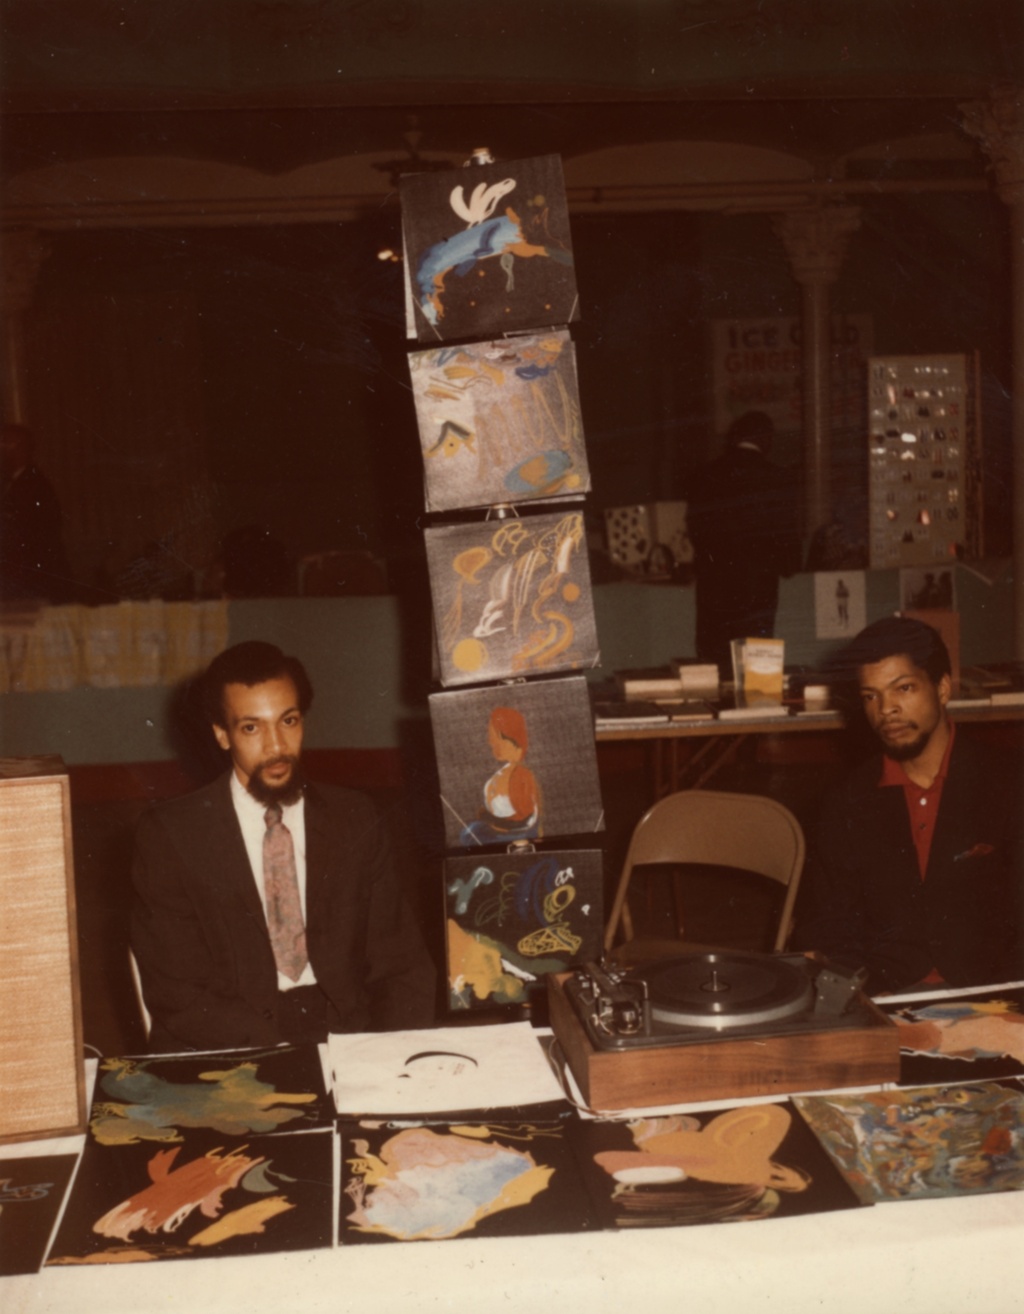 Photograph of two men sitting behind a table surrounded by hand painted album covers.